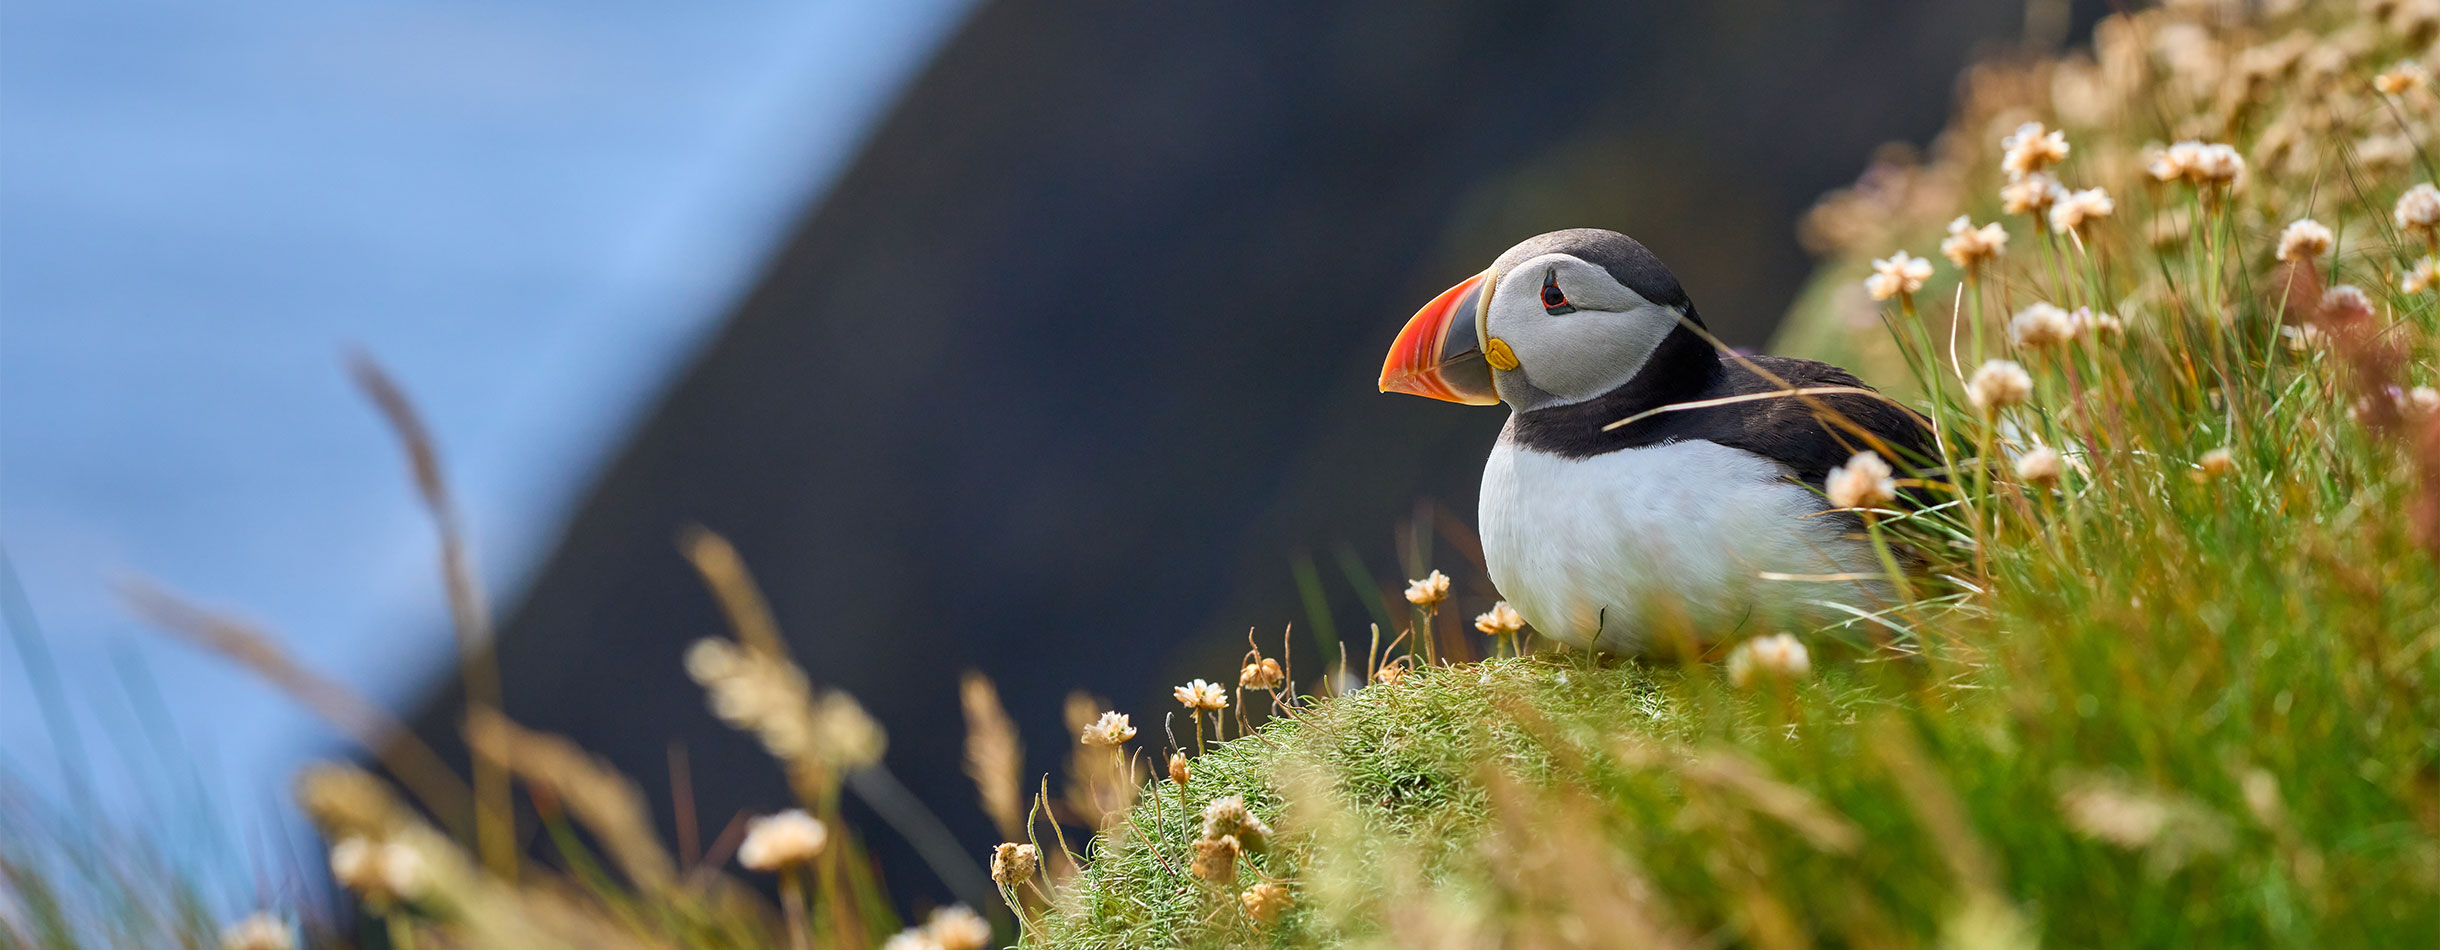 Puffins on a cliff, Shetlands